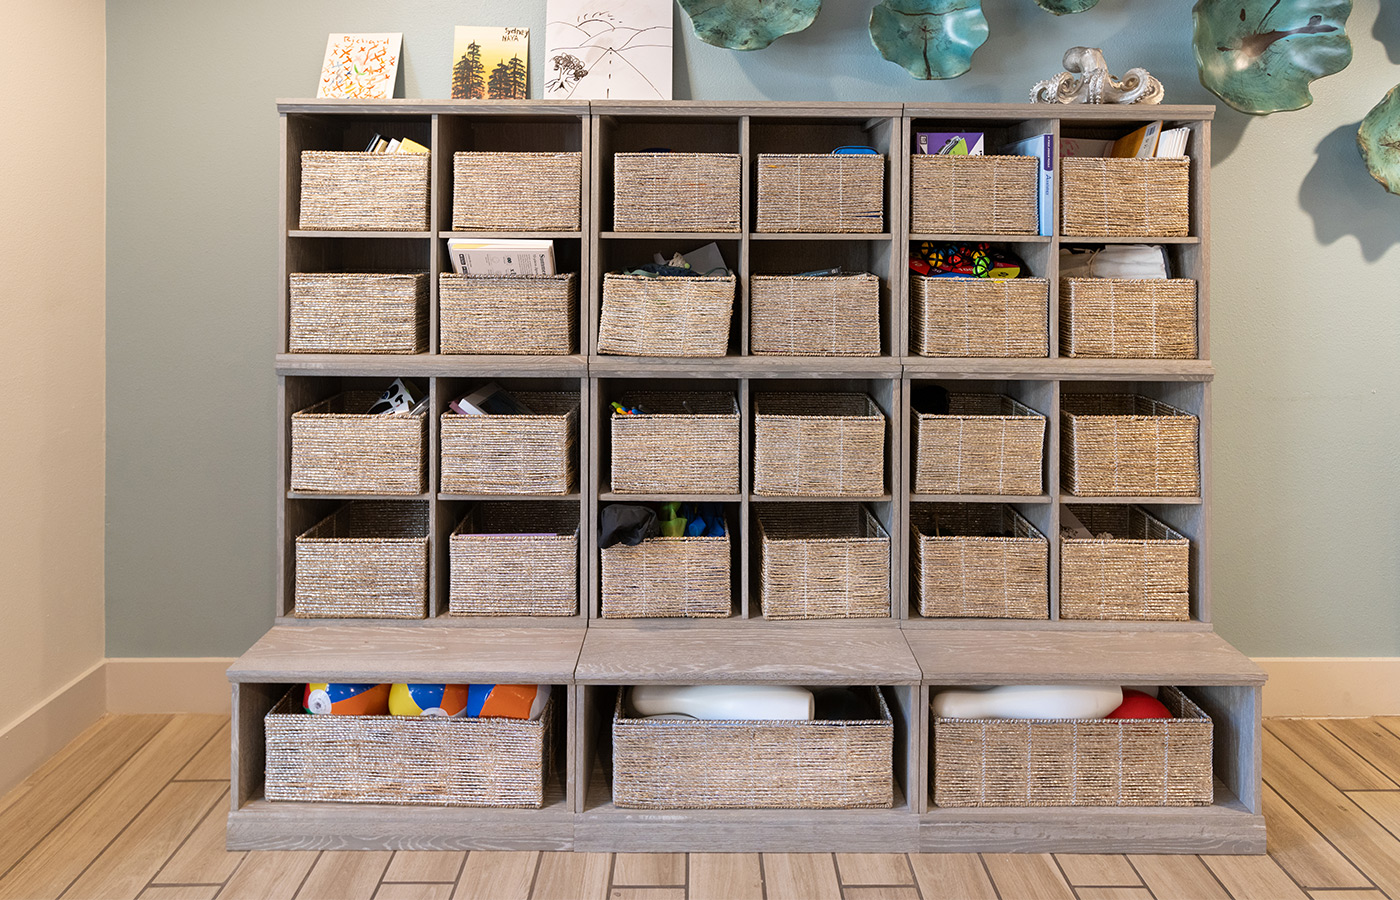 A shelving unit consisting of multiple baskets.